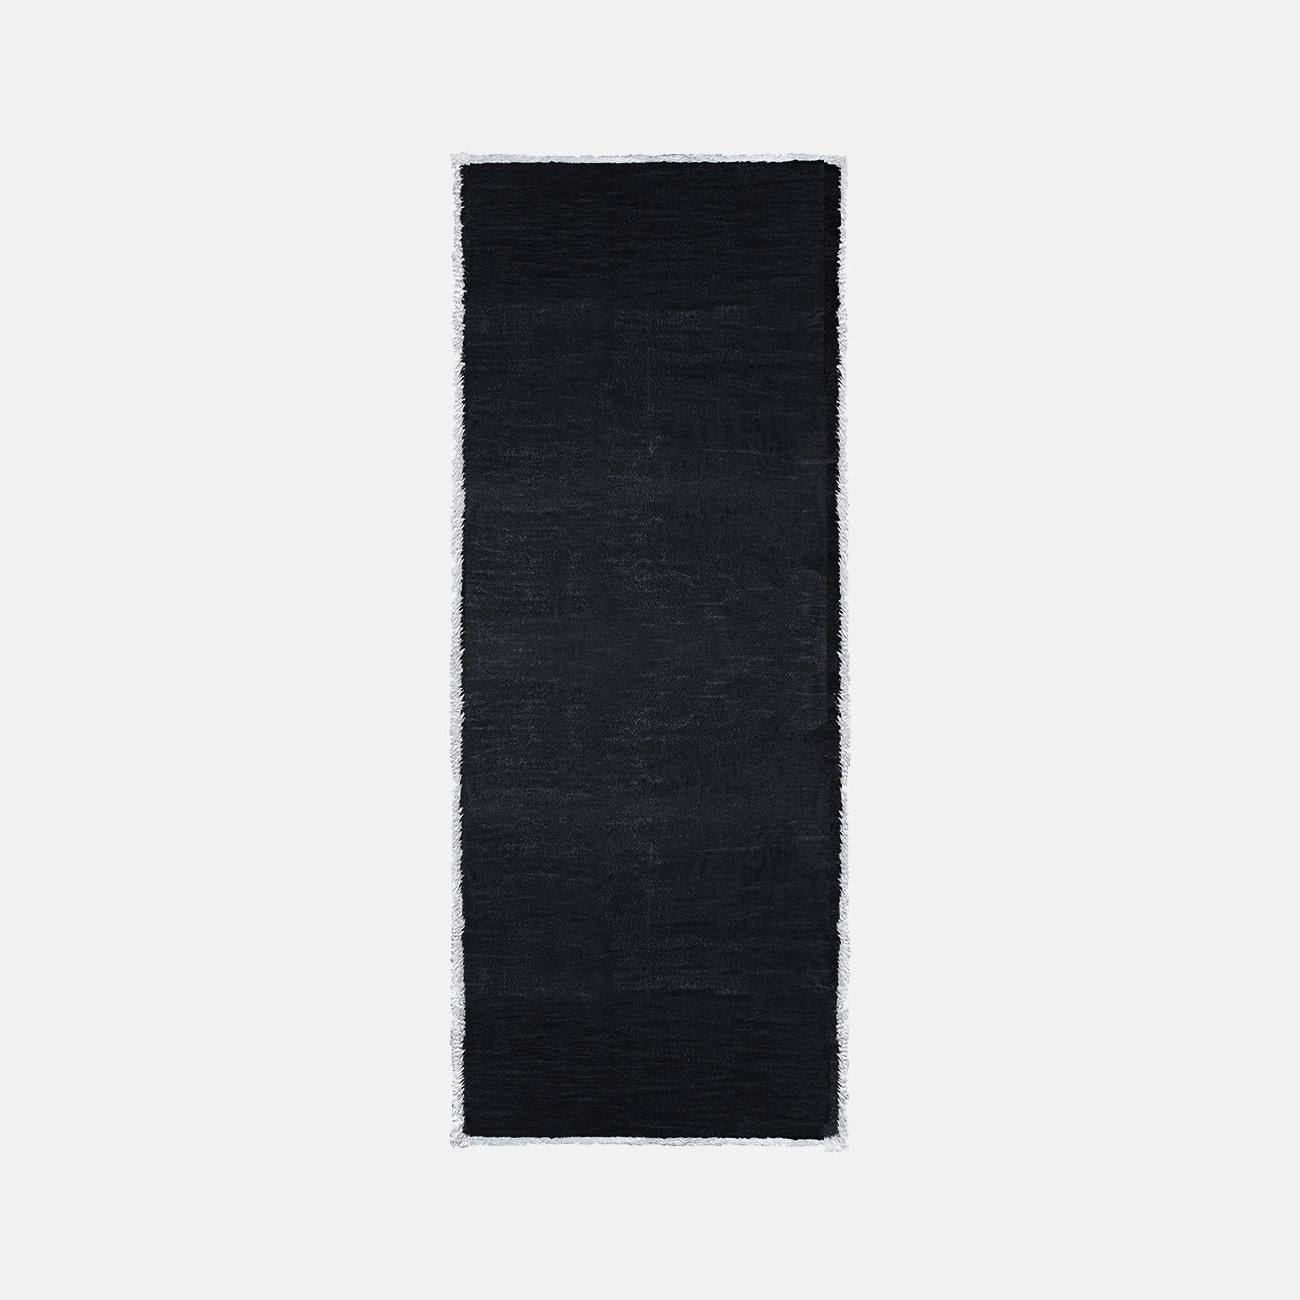 Kimoto Frame Mauro Night Edit Runner Rug by Atelier Bowy C.D.
Dimensions: W 120 x L 465 cm.
Materials: Wool, silk.

Available in W100 x L320, W110 x L350, W120 x L465 cm.

Atelier Bowy C.D. is dedicated to crafting contemporary handmade rugs for